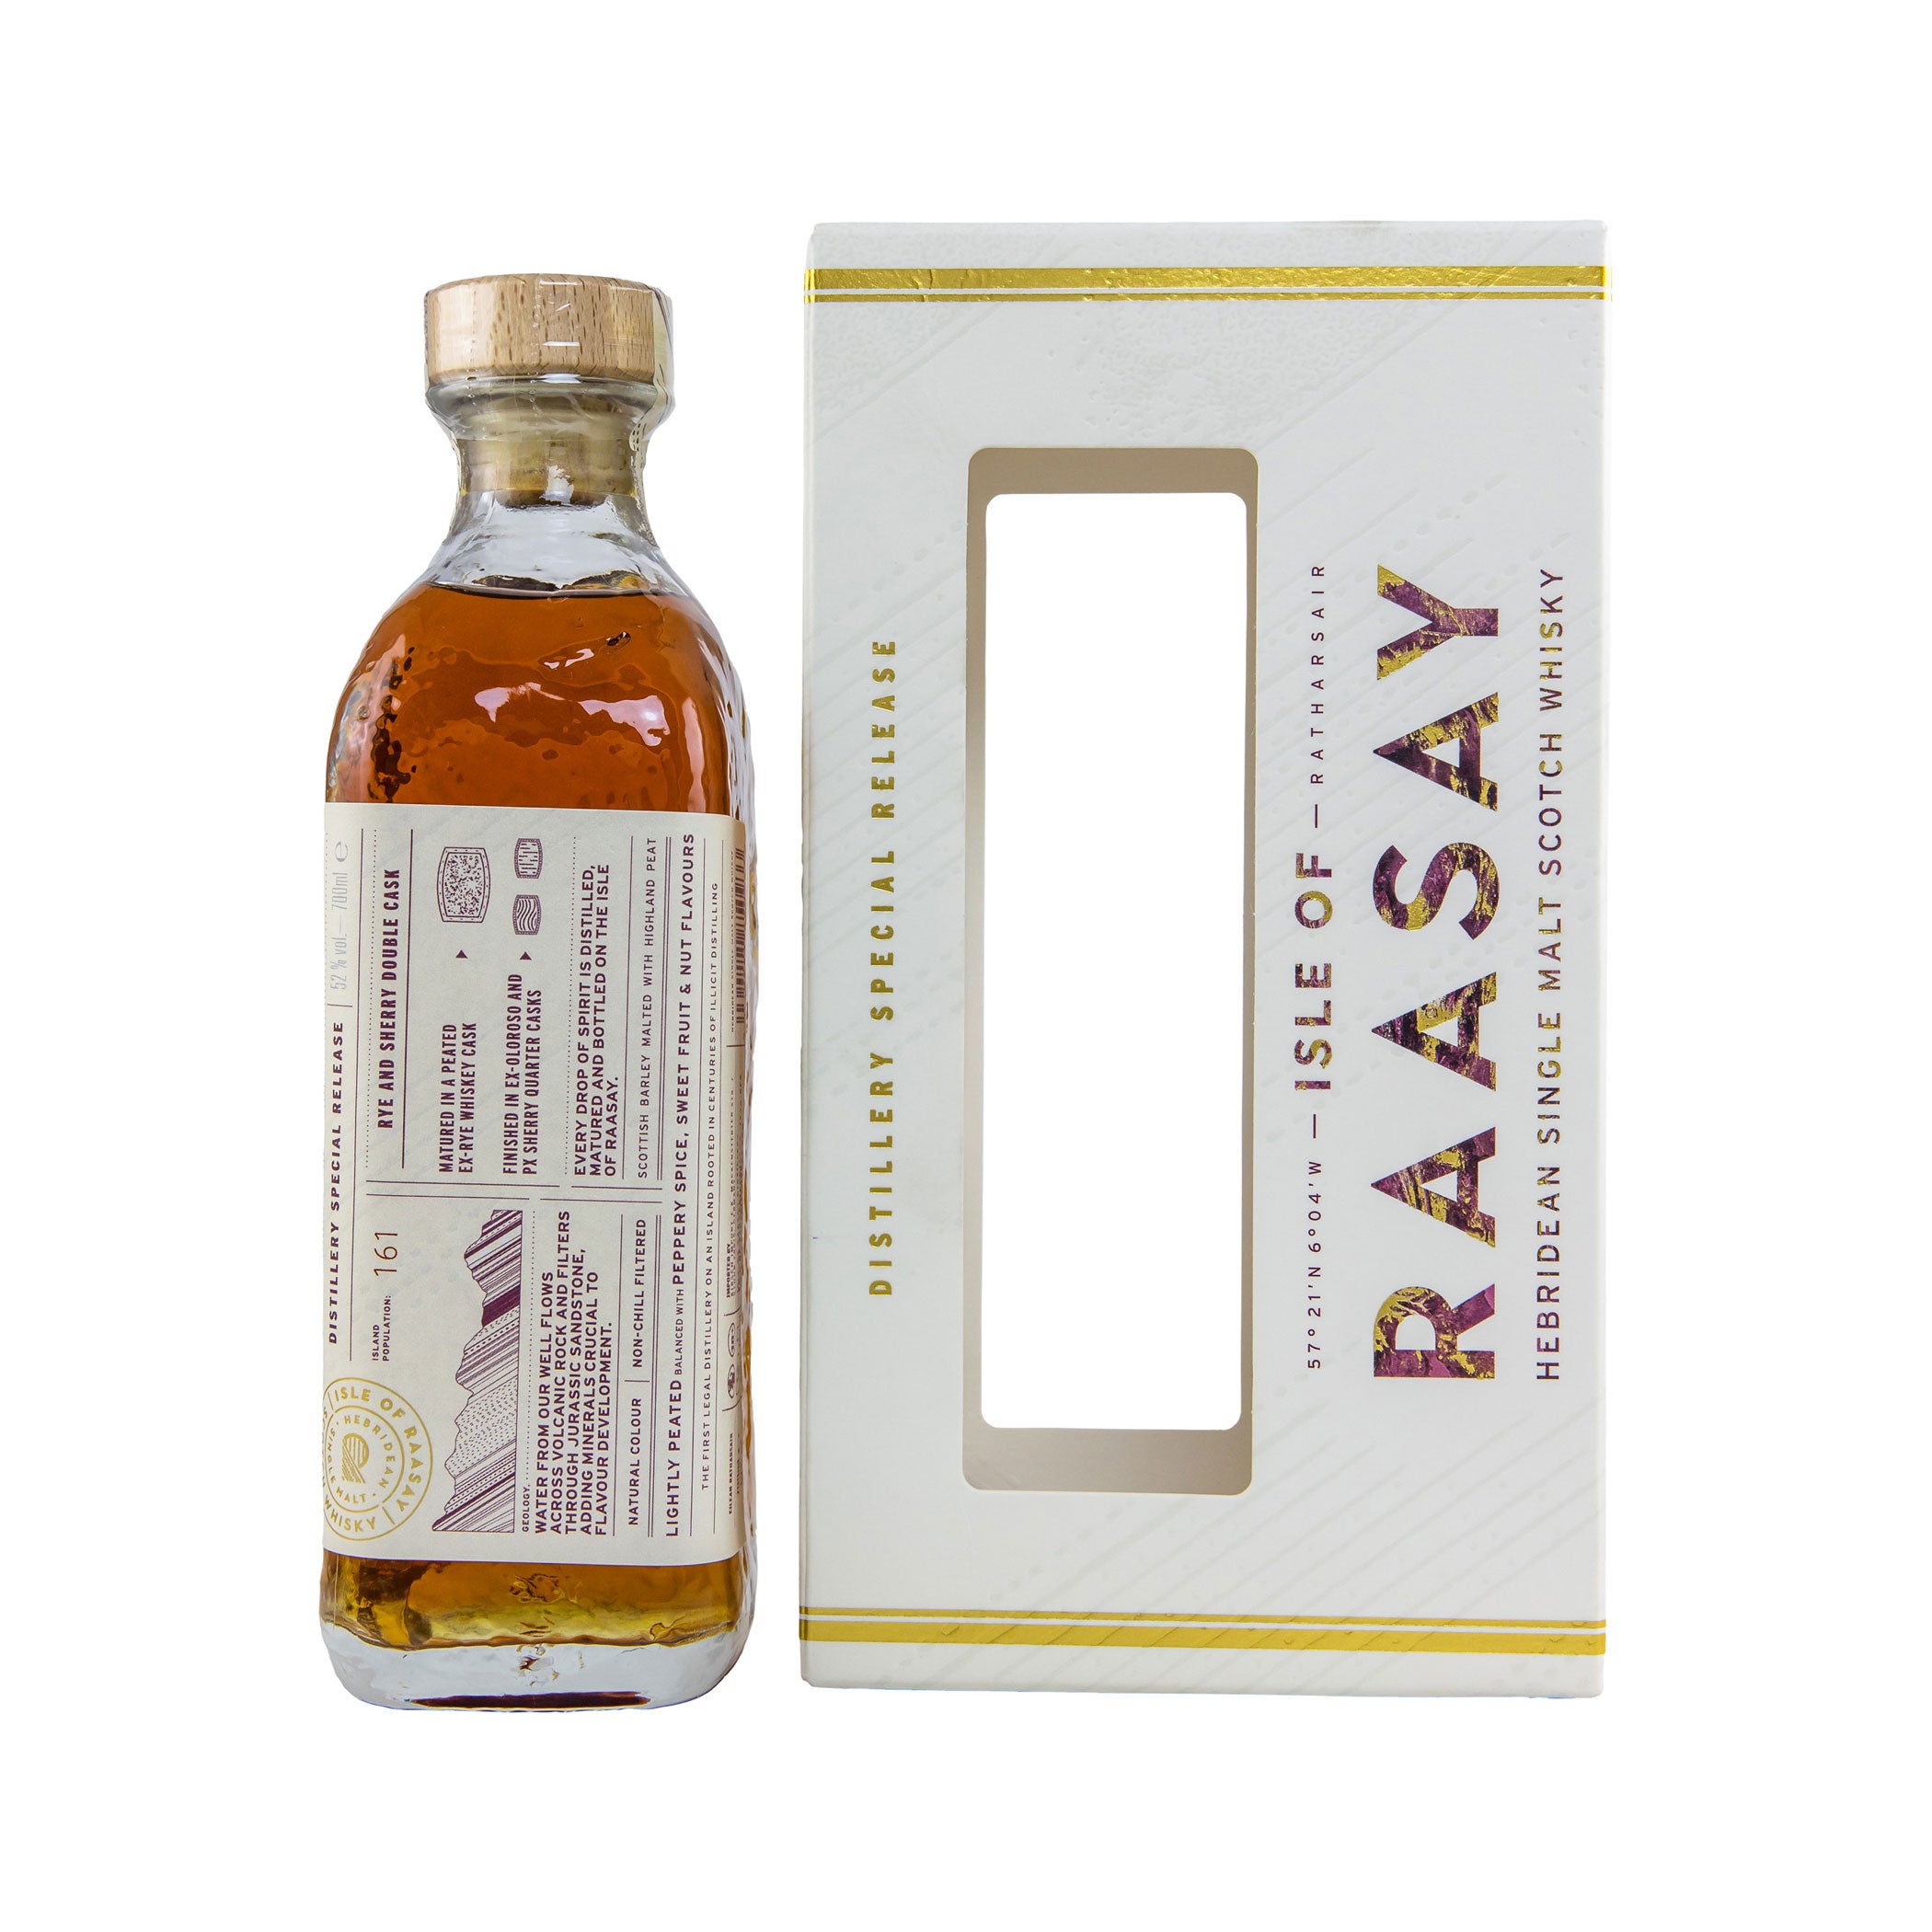 Isle of Raasay Single Malt - Whisky - Special Release: Sherry Finish